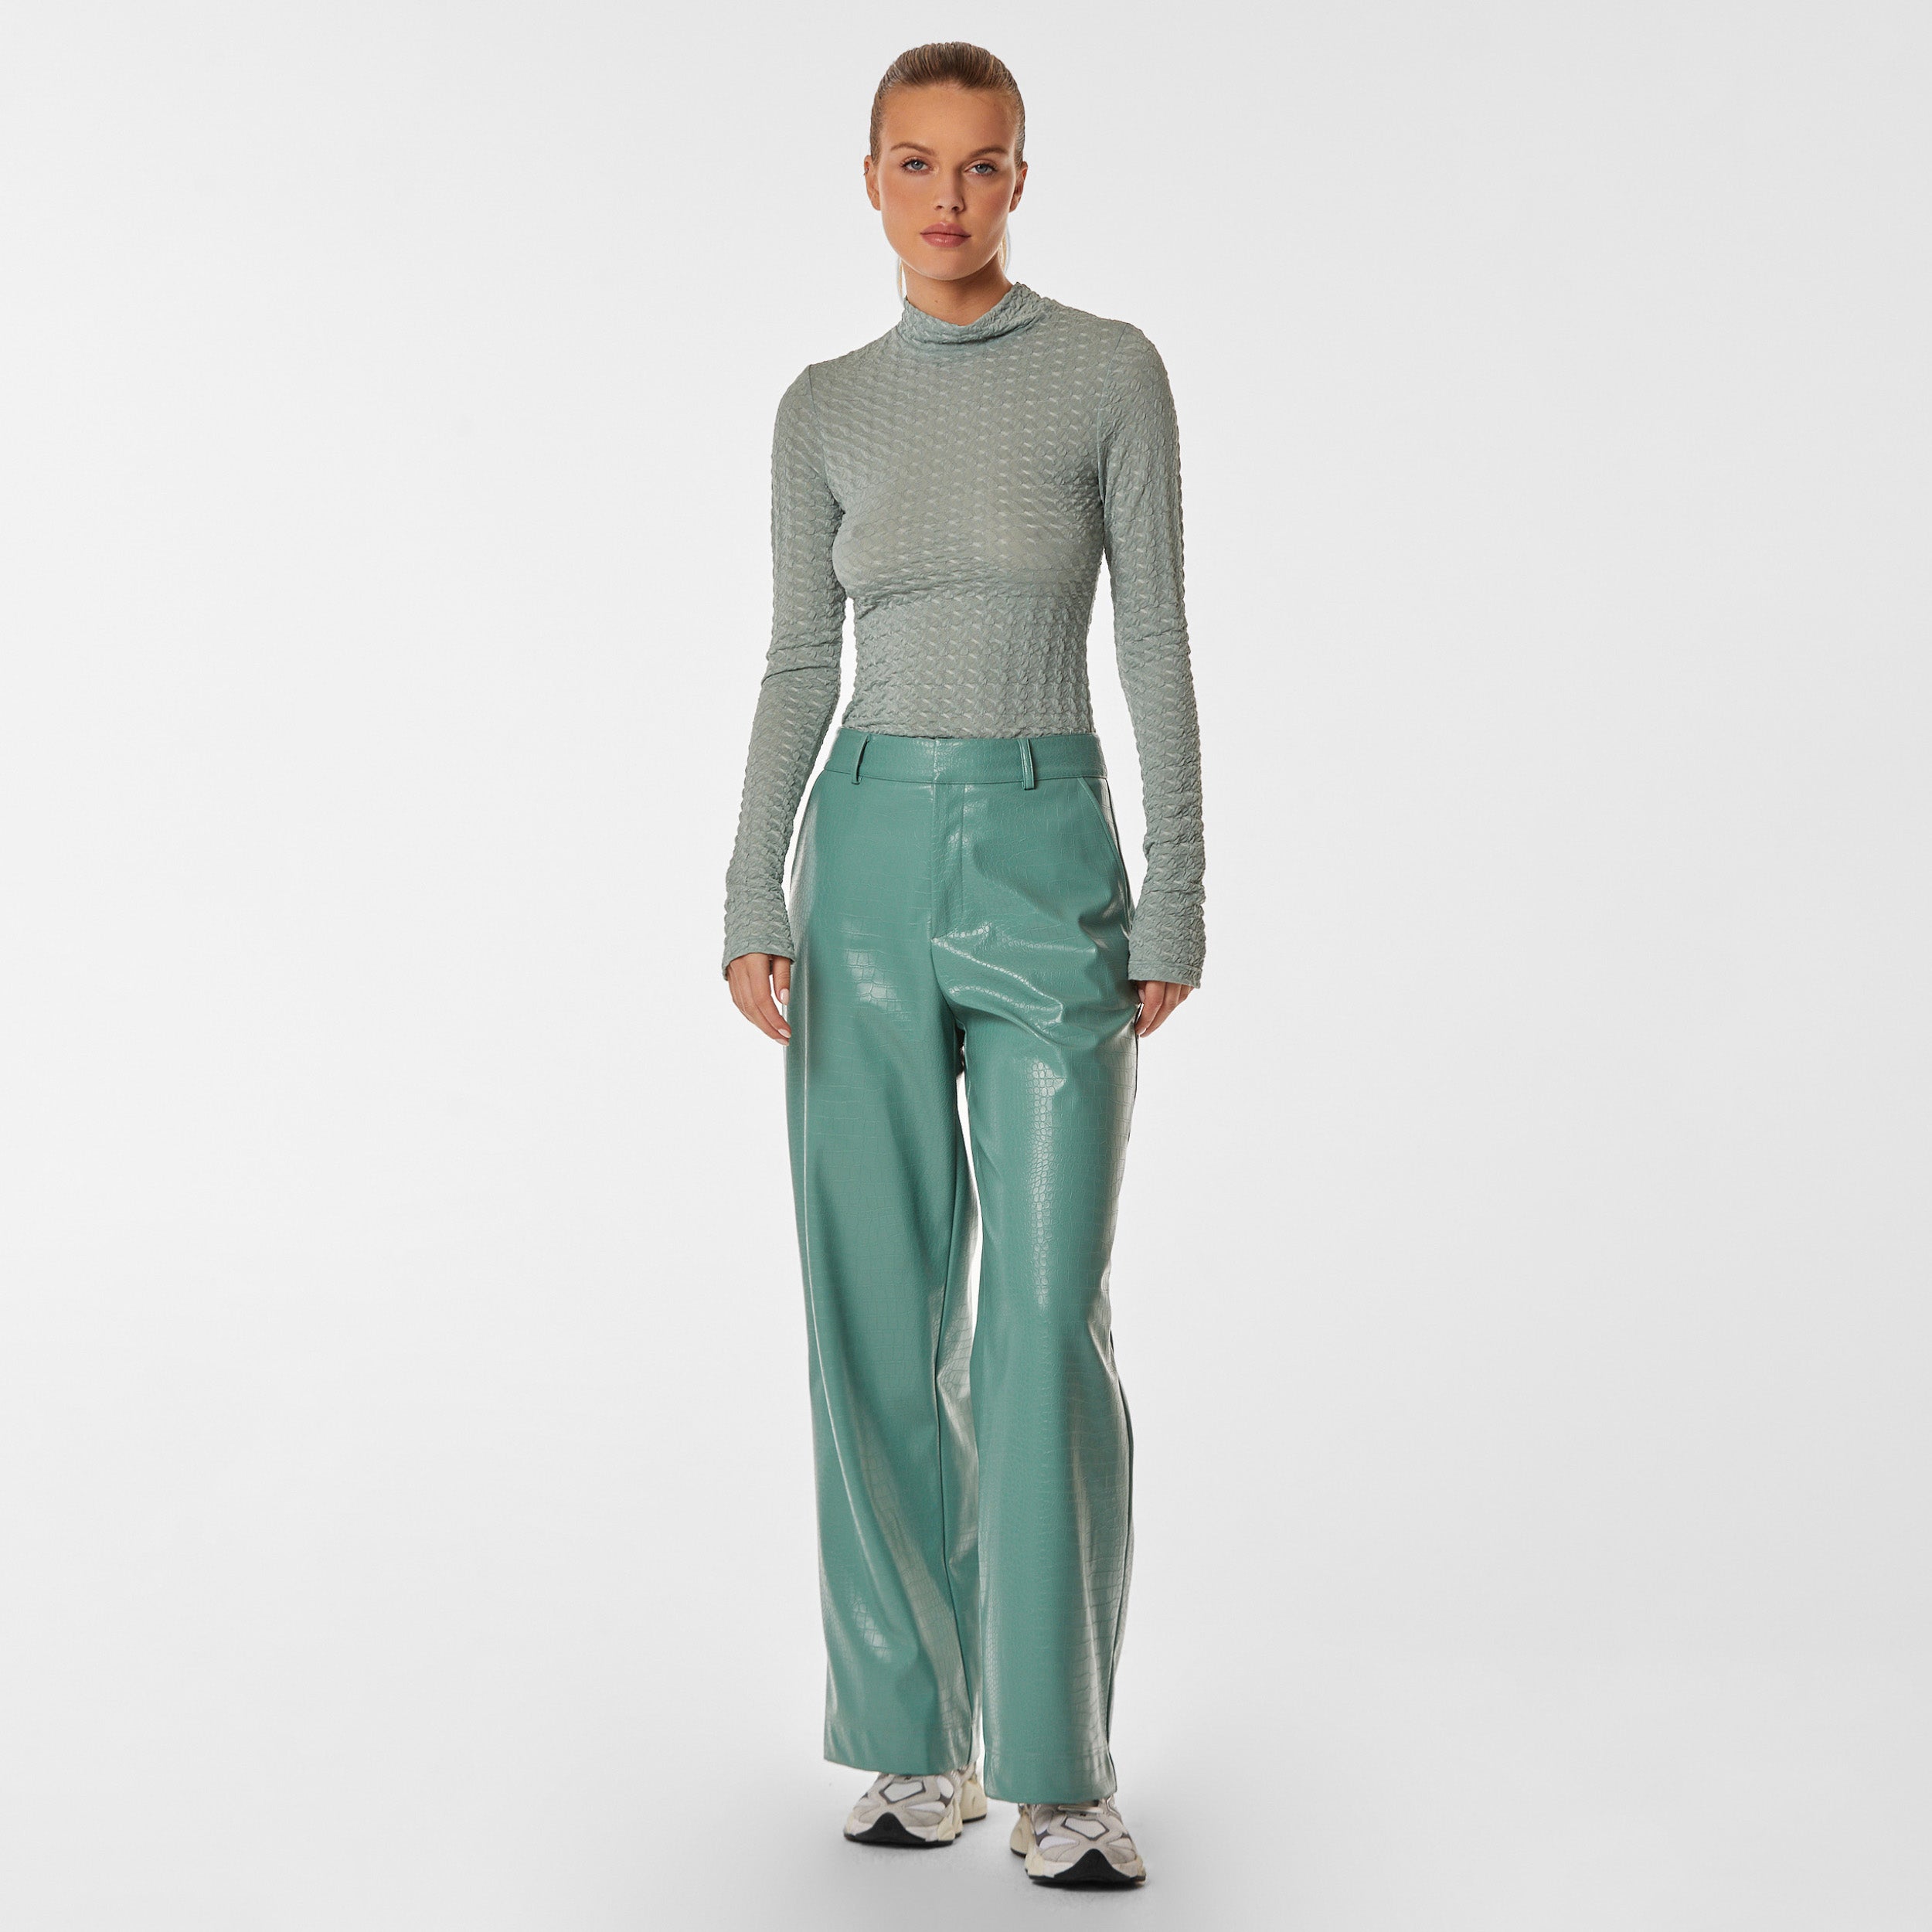 Fully body view of woman wearing green stretch mesh textured turtleneck sweater and mint green croco embossed faux leather pant.